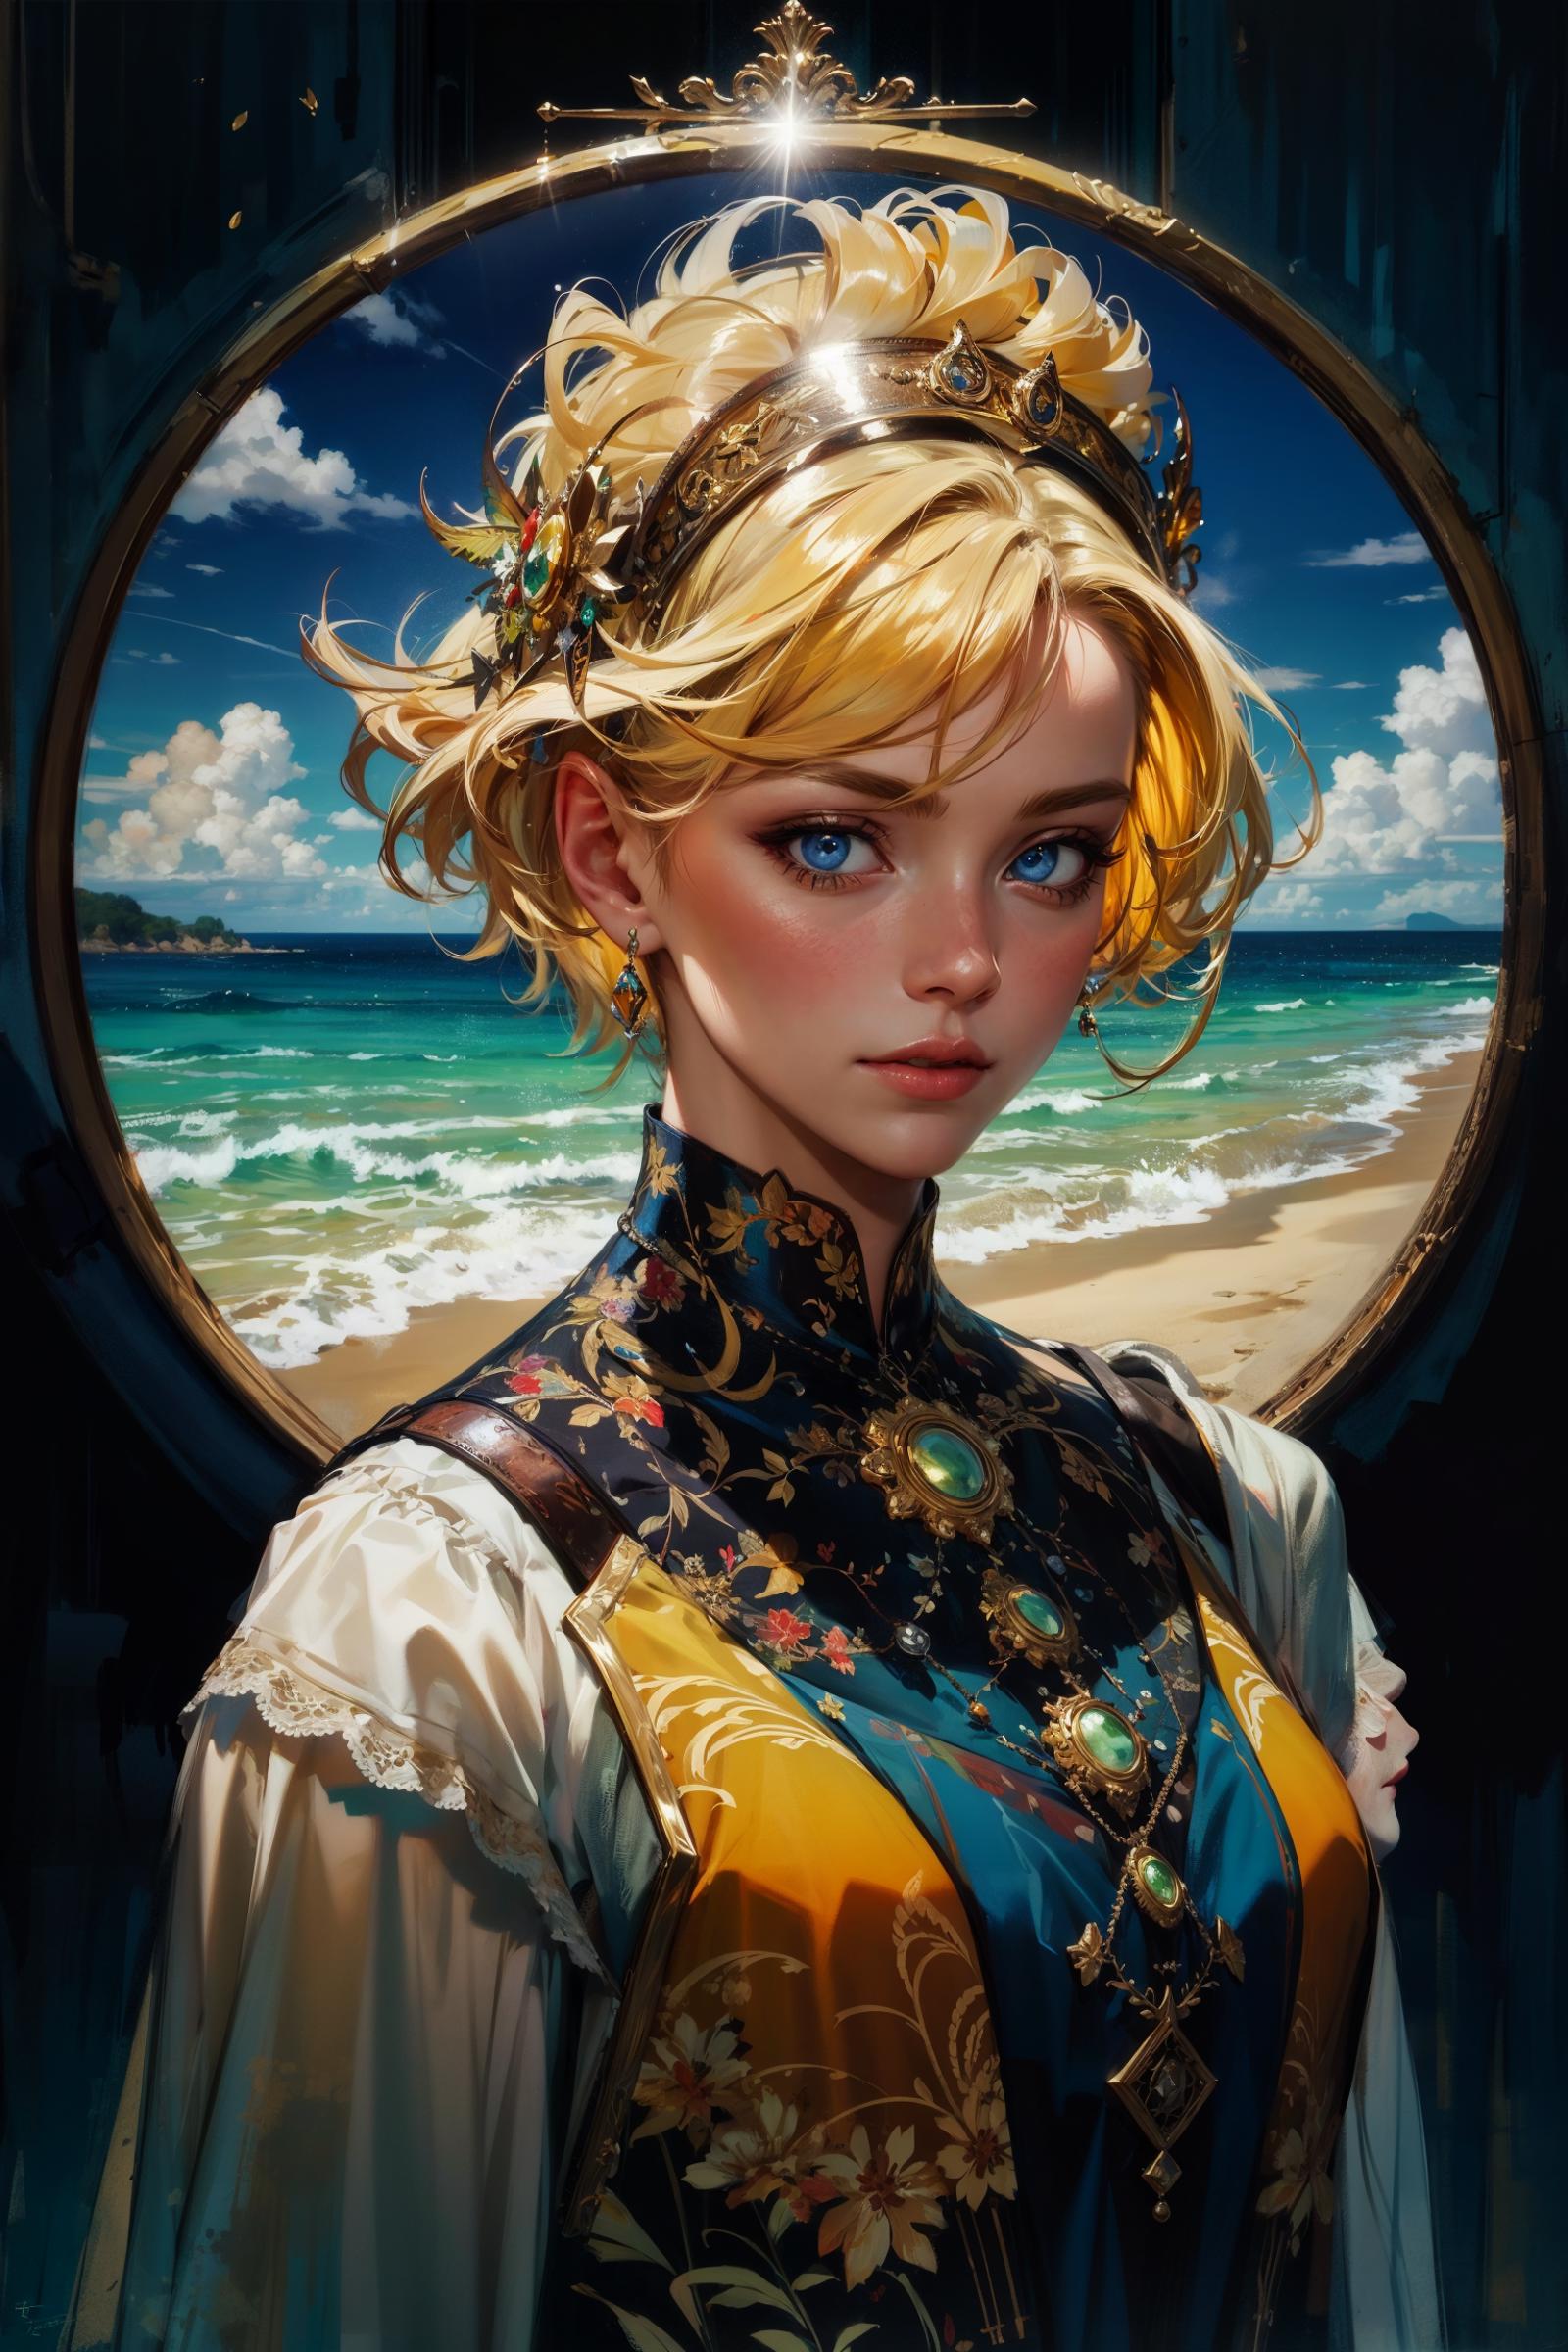 A young woman with blue eyes and blonde hair wearing a blue dress and a tiara, looking out at the ocean.